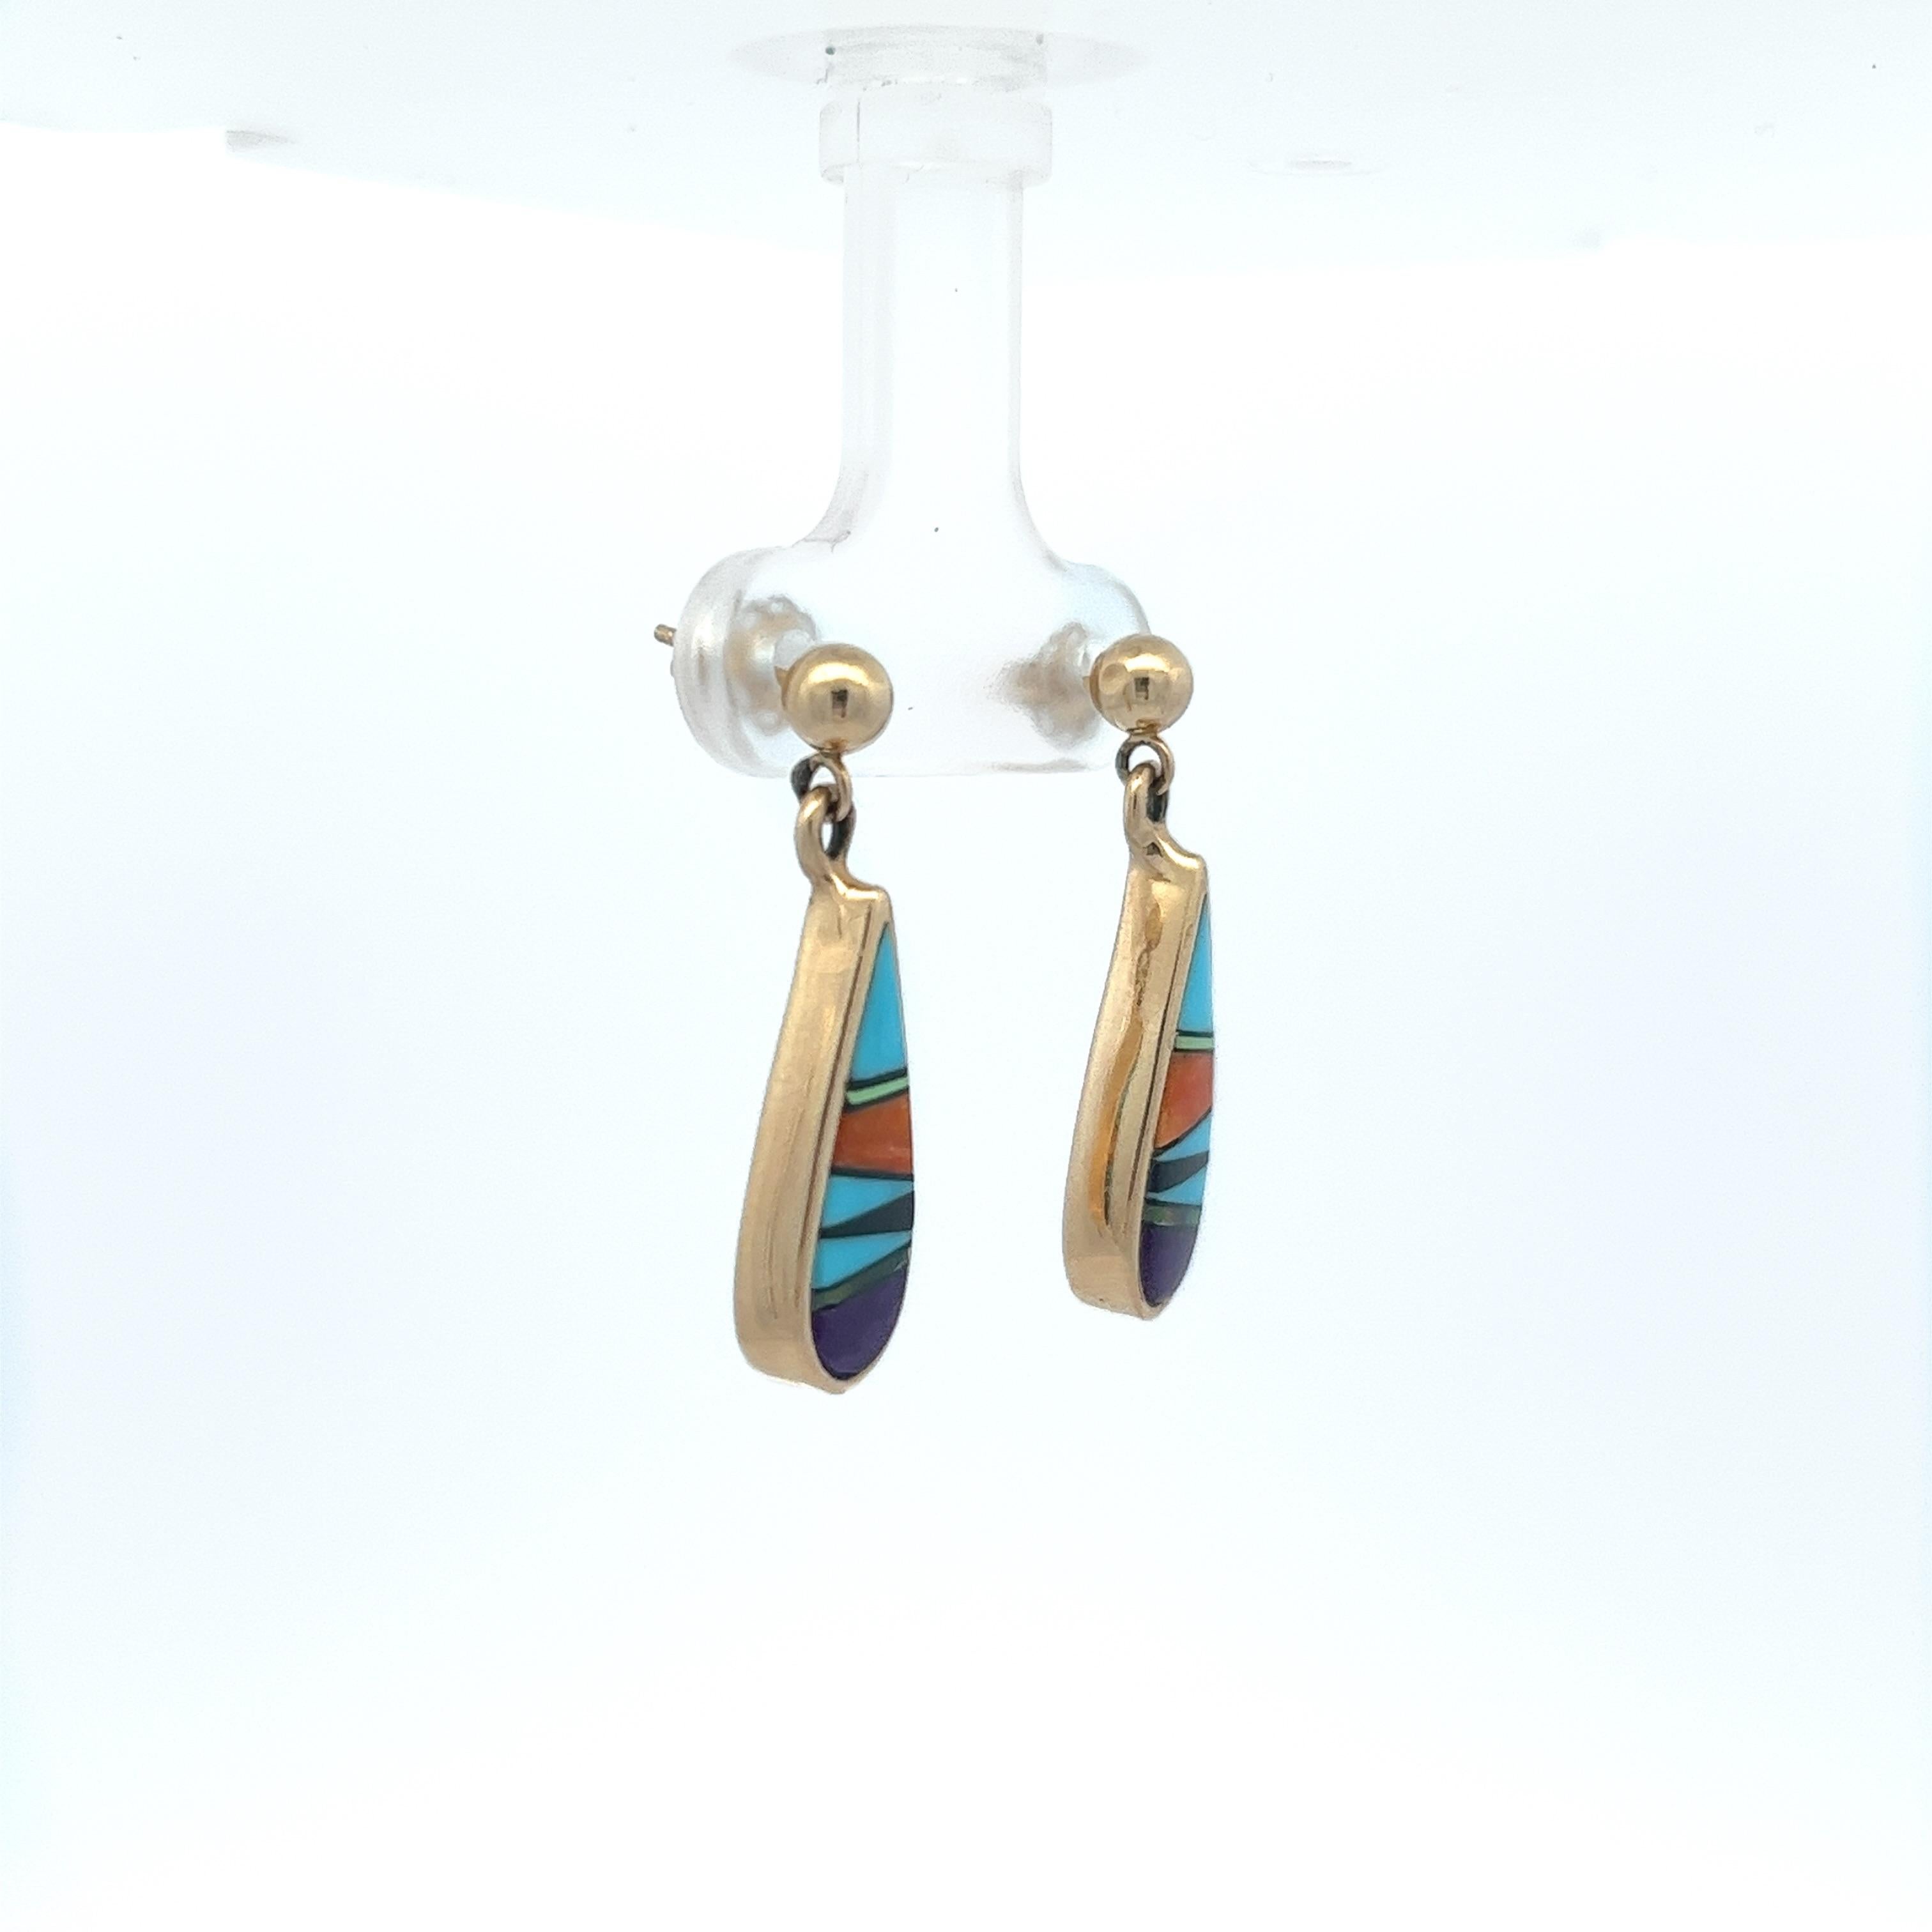 These multicolored Zuni inlay drop earrings are meticulously crafted from 14 karat yellow gold, featuring an exquisite combination of turquoise, sugilite, opal, onyx, and coral. The Zuni inlay method, a distinct feature in these earrings, is a